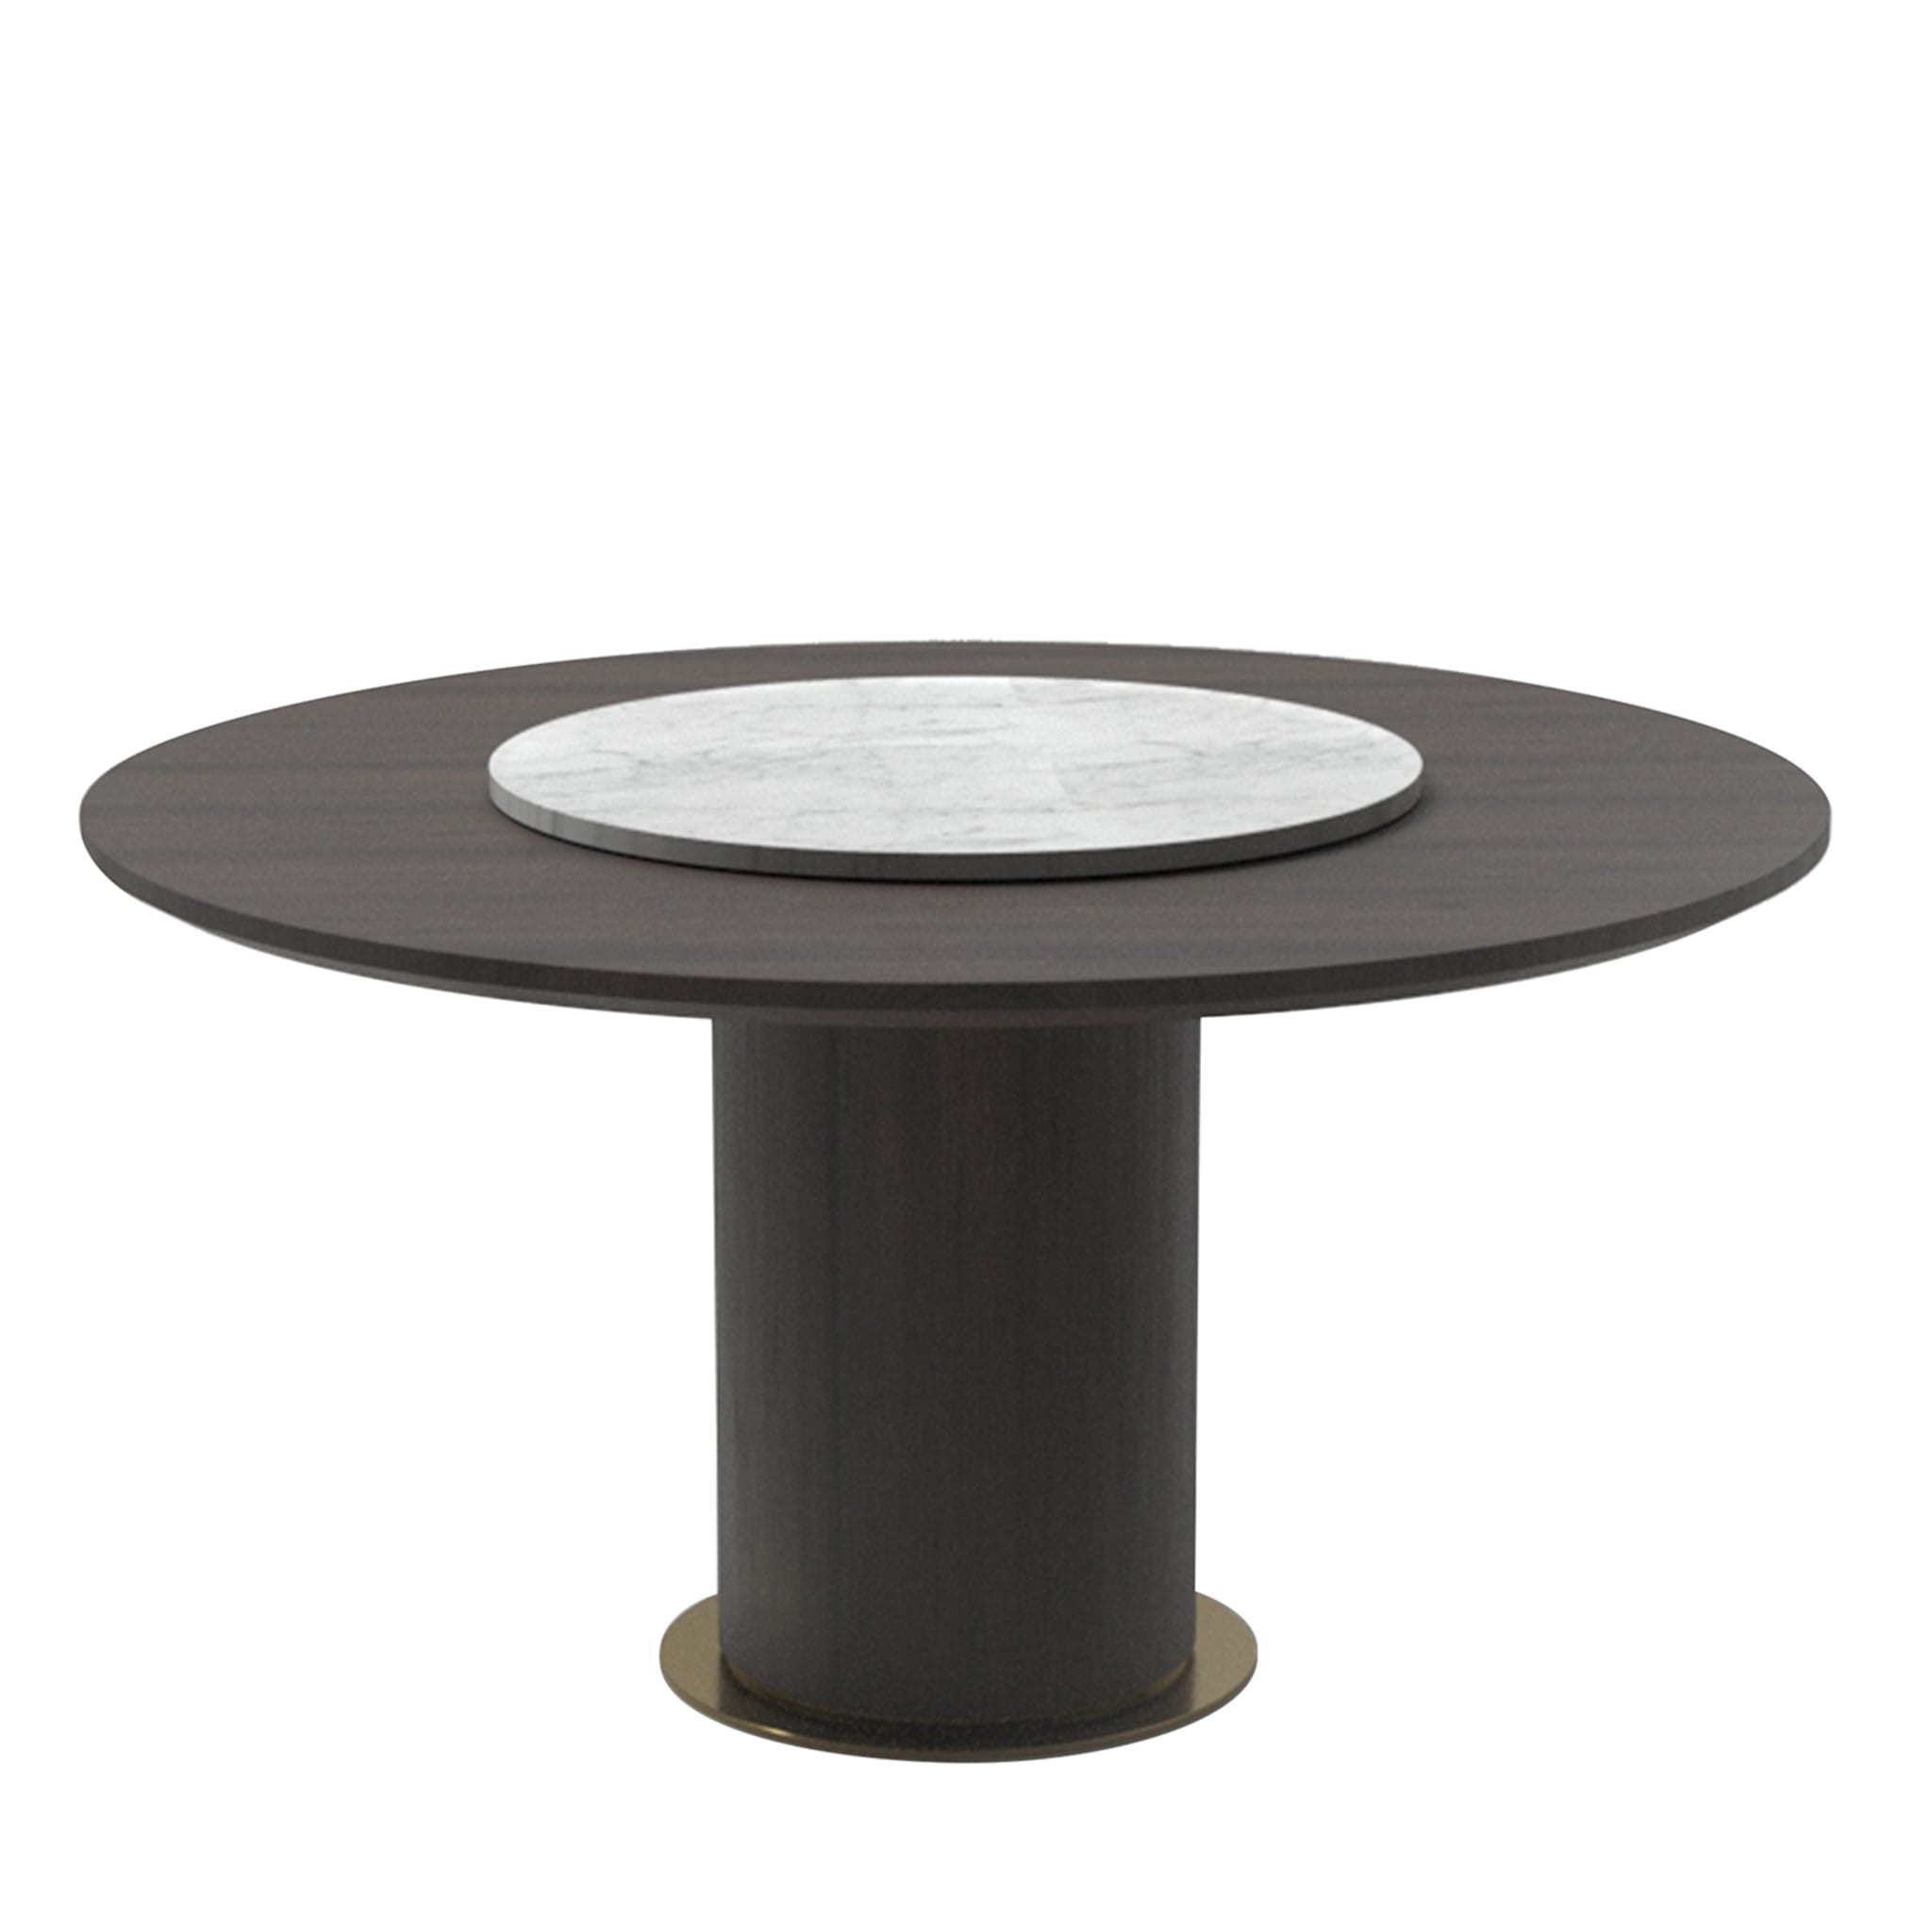 Circle Dining Table with Lazy Susan by Gianluigi Landoni - Main view